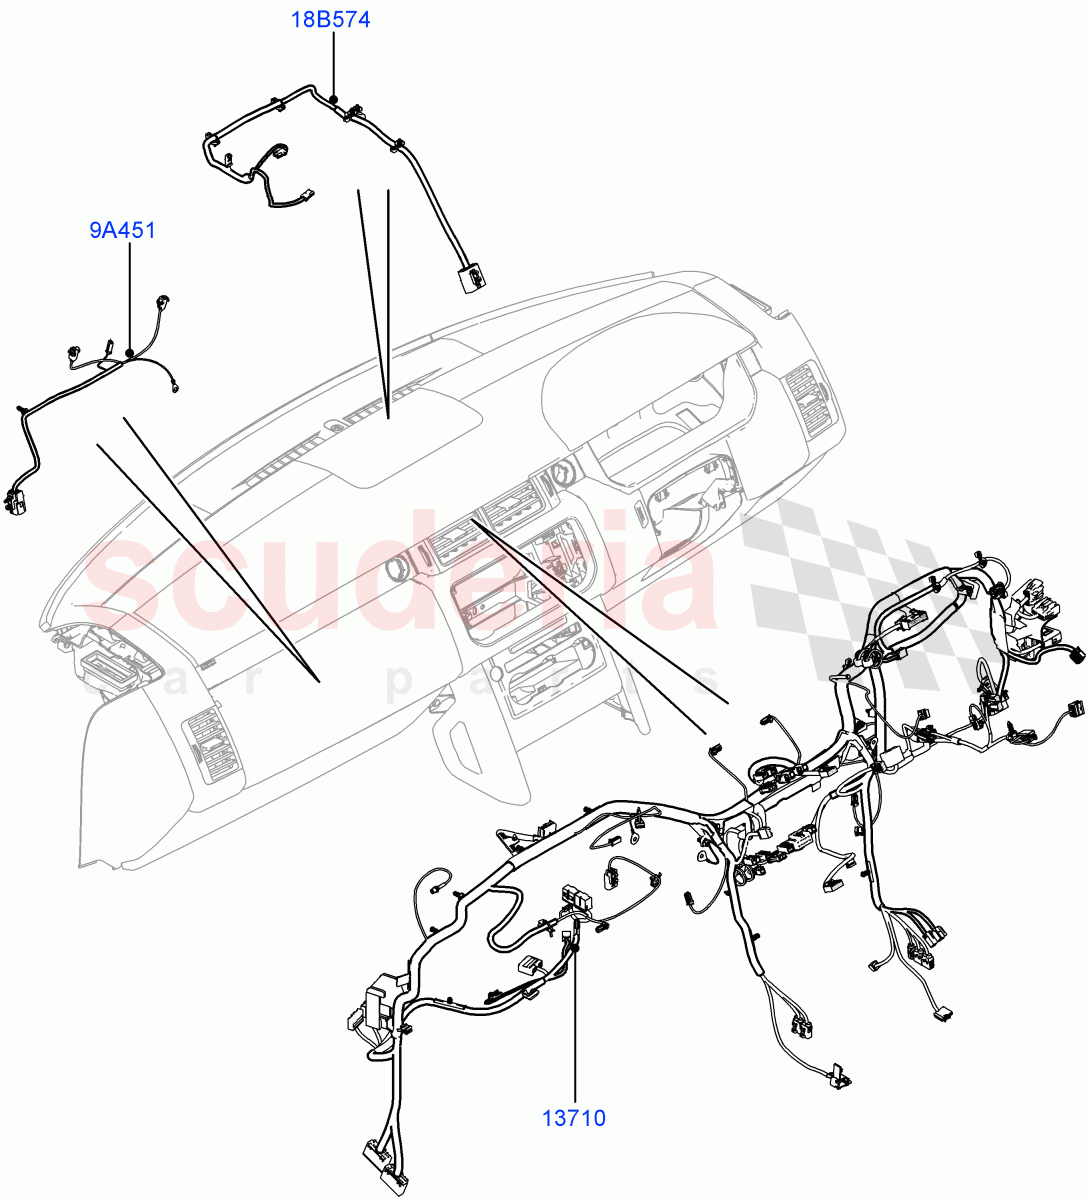 Electrical Wiring - Engine And Dash(Facia)(3.0 V6 Diesel Electric Hybrid Eng)((V)FROMFA000001,(V)TOFA999999) of Land Rover Land Rover Range Rover (2012-2021) [5.0 OHC SGDI NA V8 Petrol]